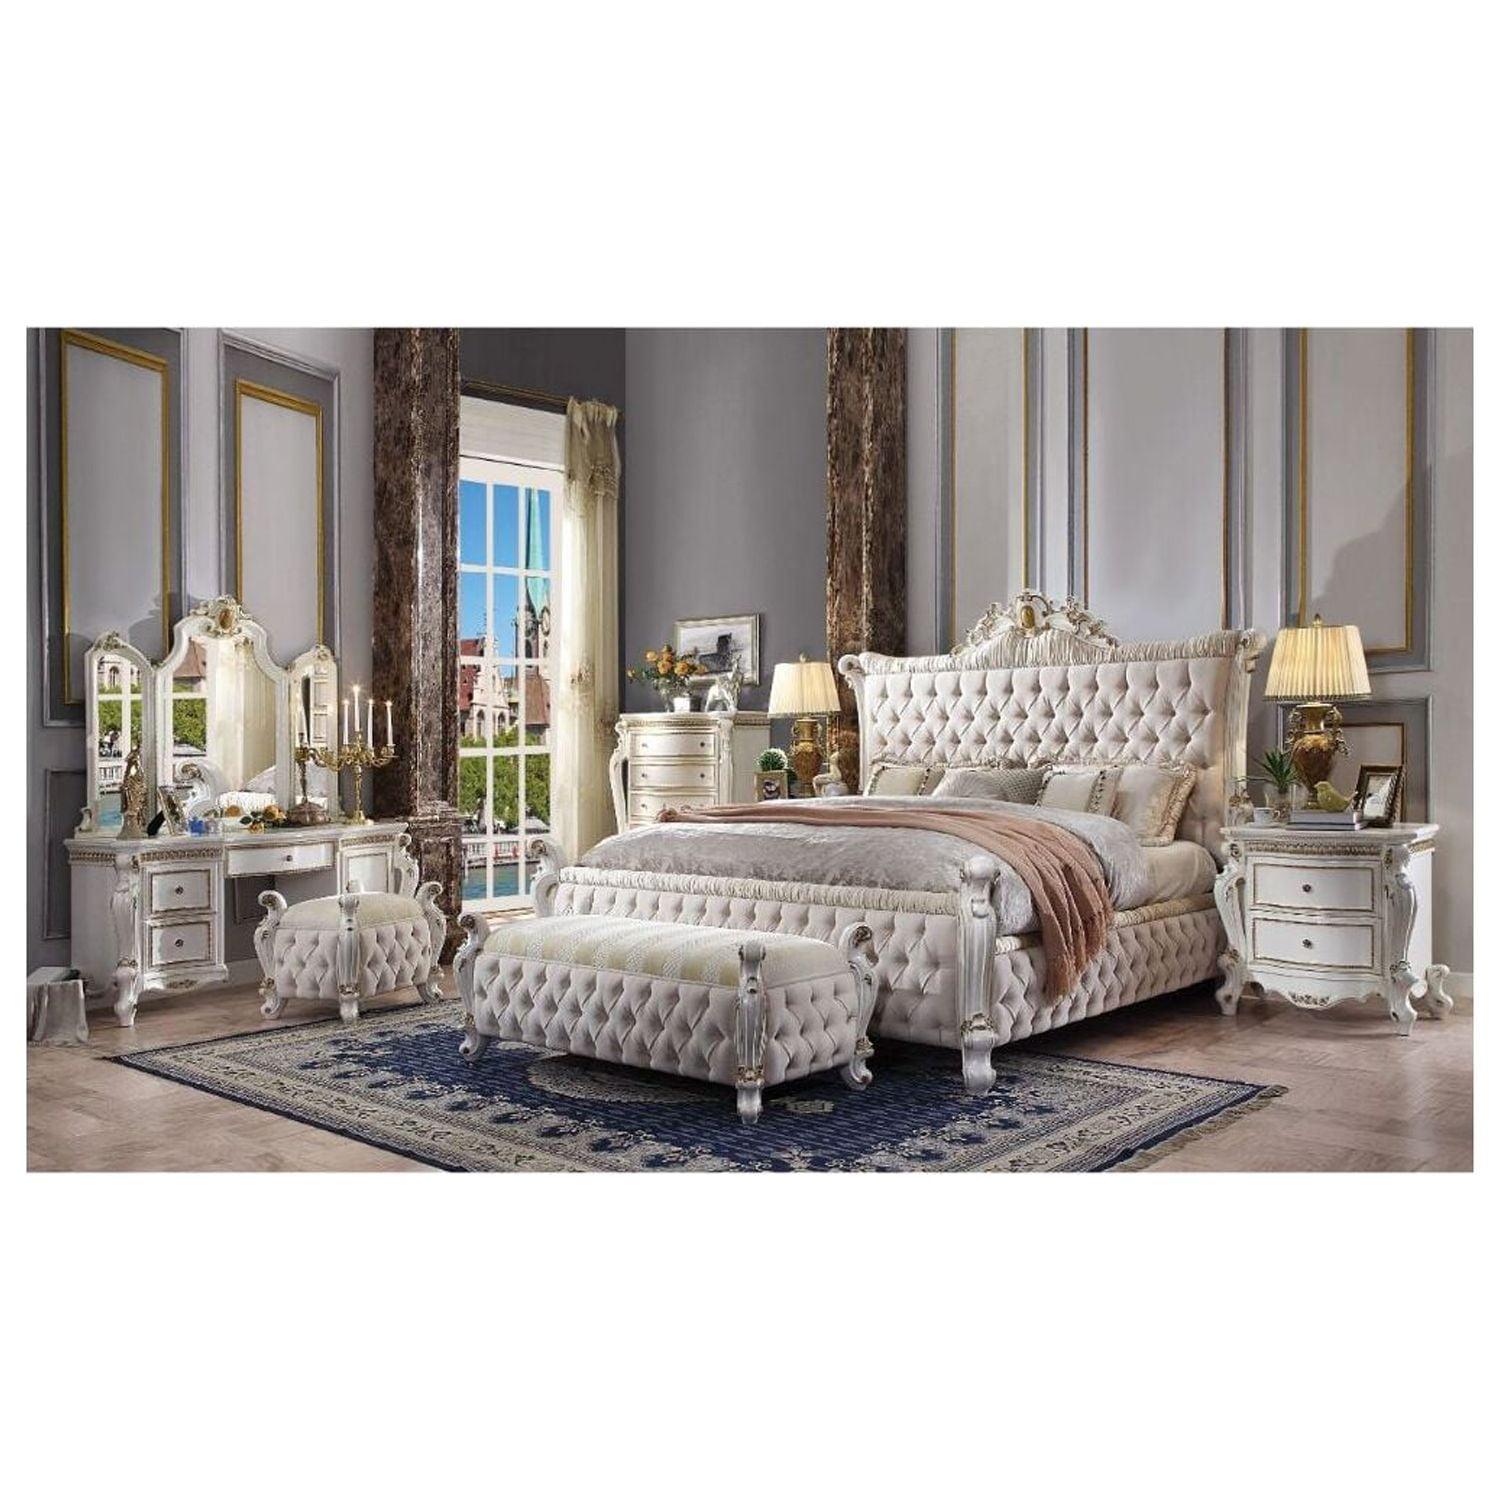 Antique Pearl Queen Bed with Tufted Upholstered Headboard and Nailhead Trim